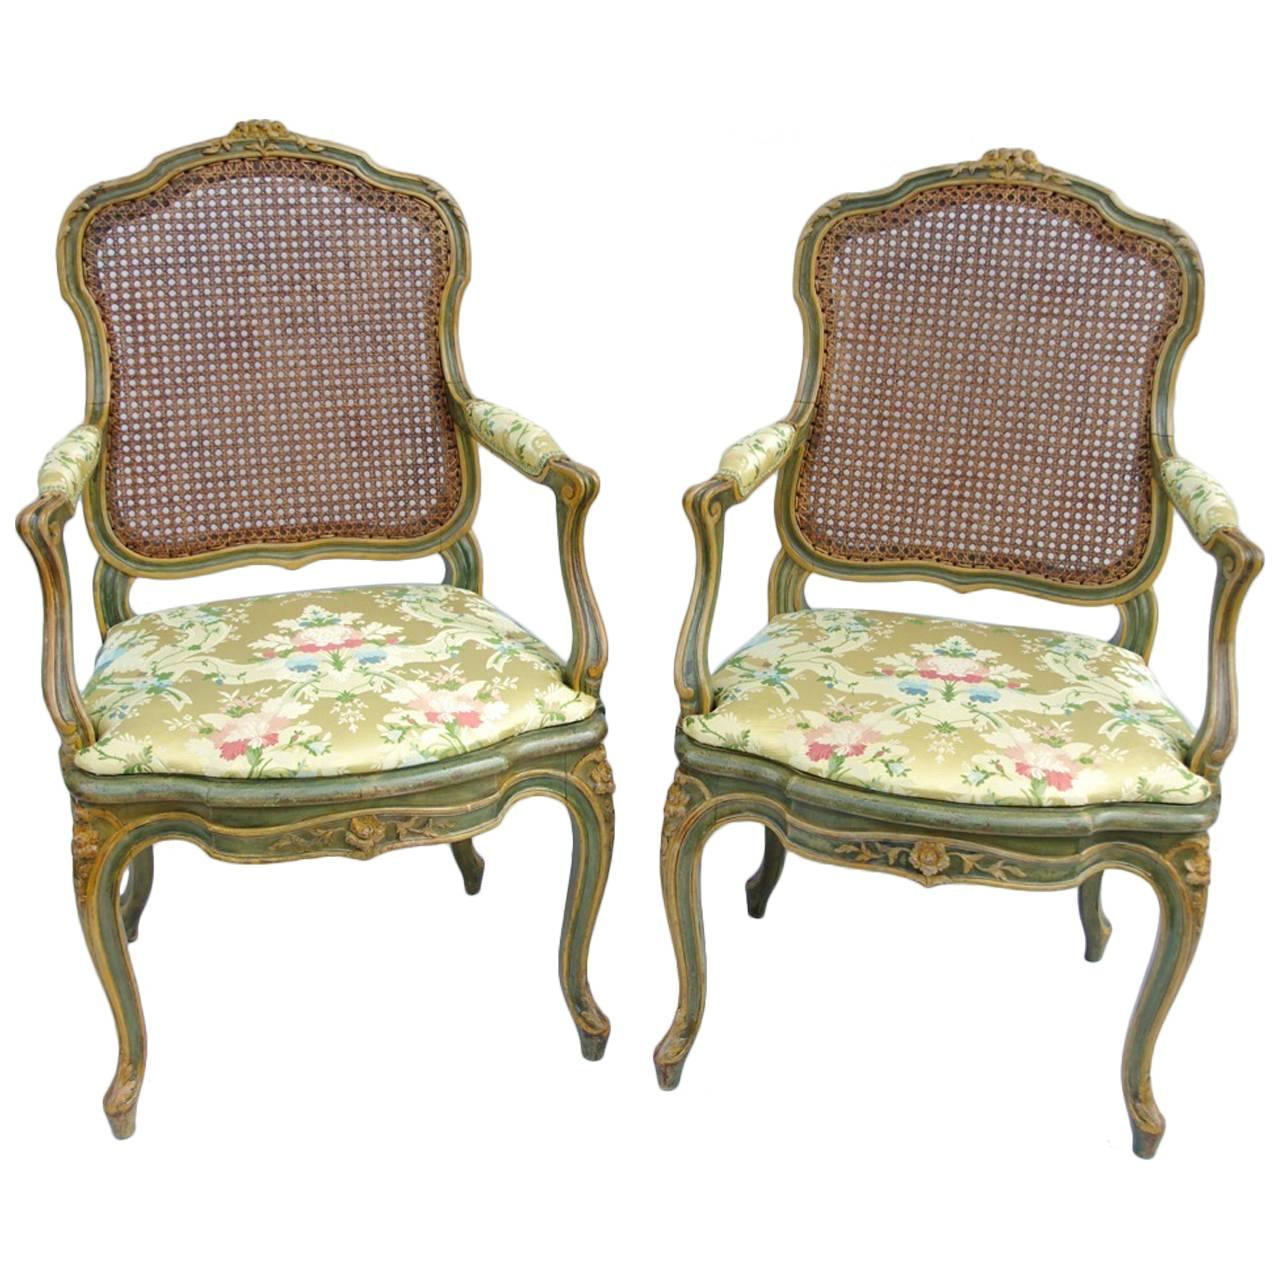 Pair of Caned Louis XV Green Armchairs, circa 1900